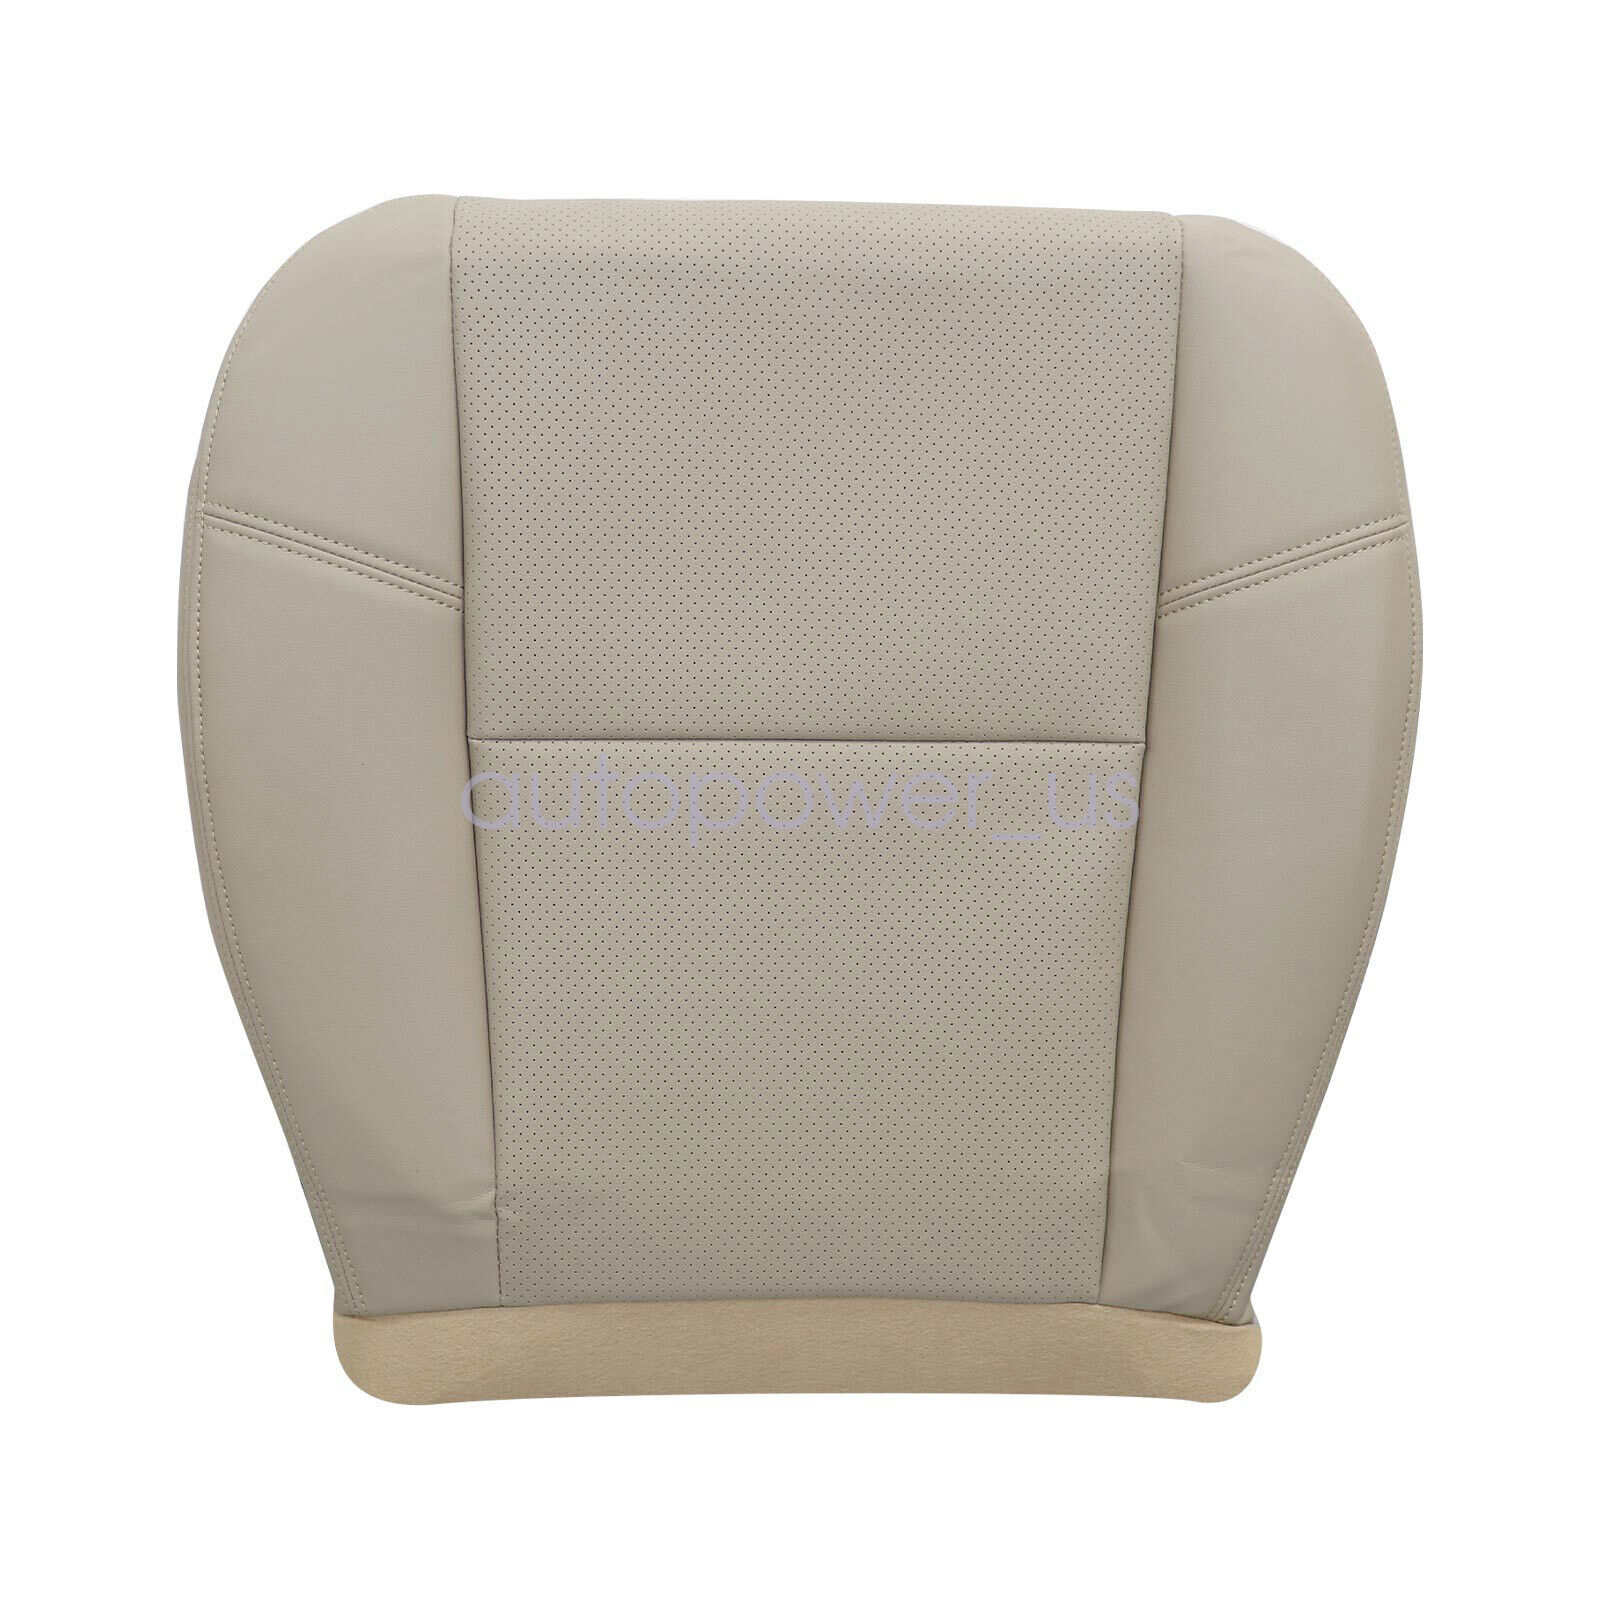 2007-2014 For Cadillac Escalade ESV EXT Leather Seat Cover Front Bottom Top Tan